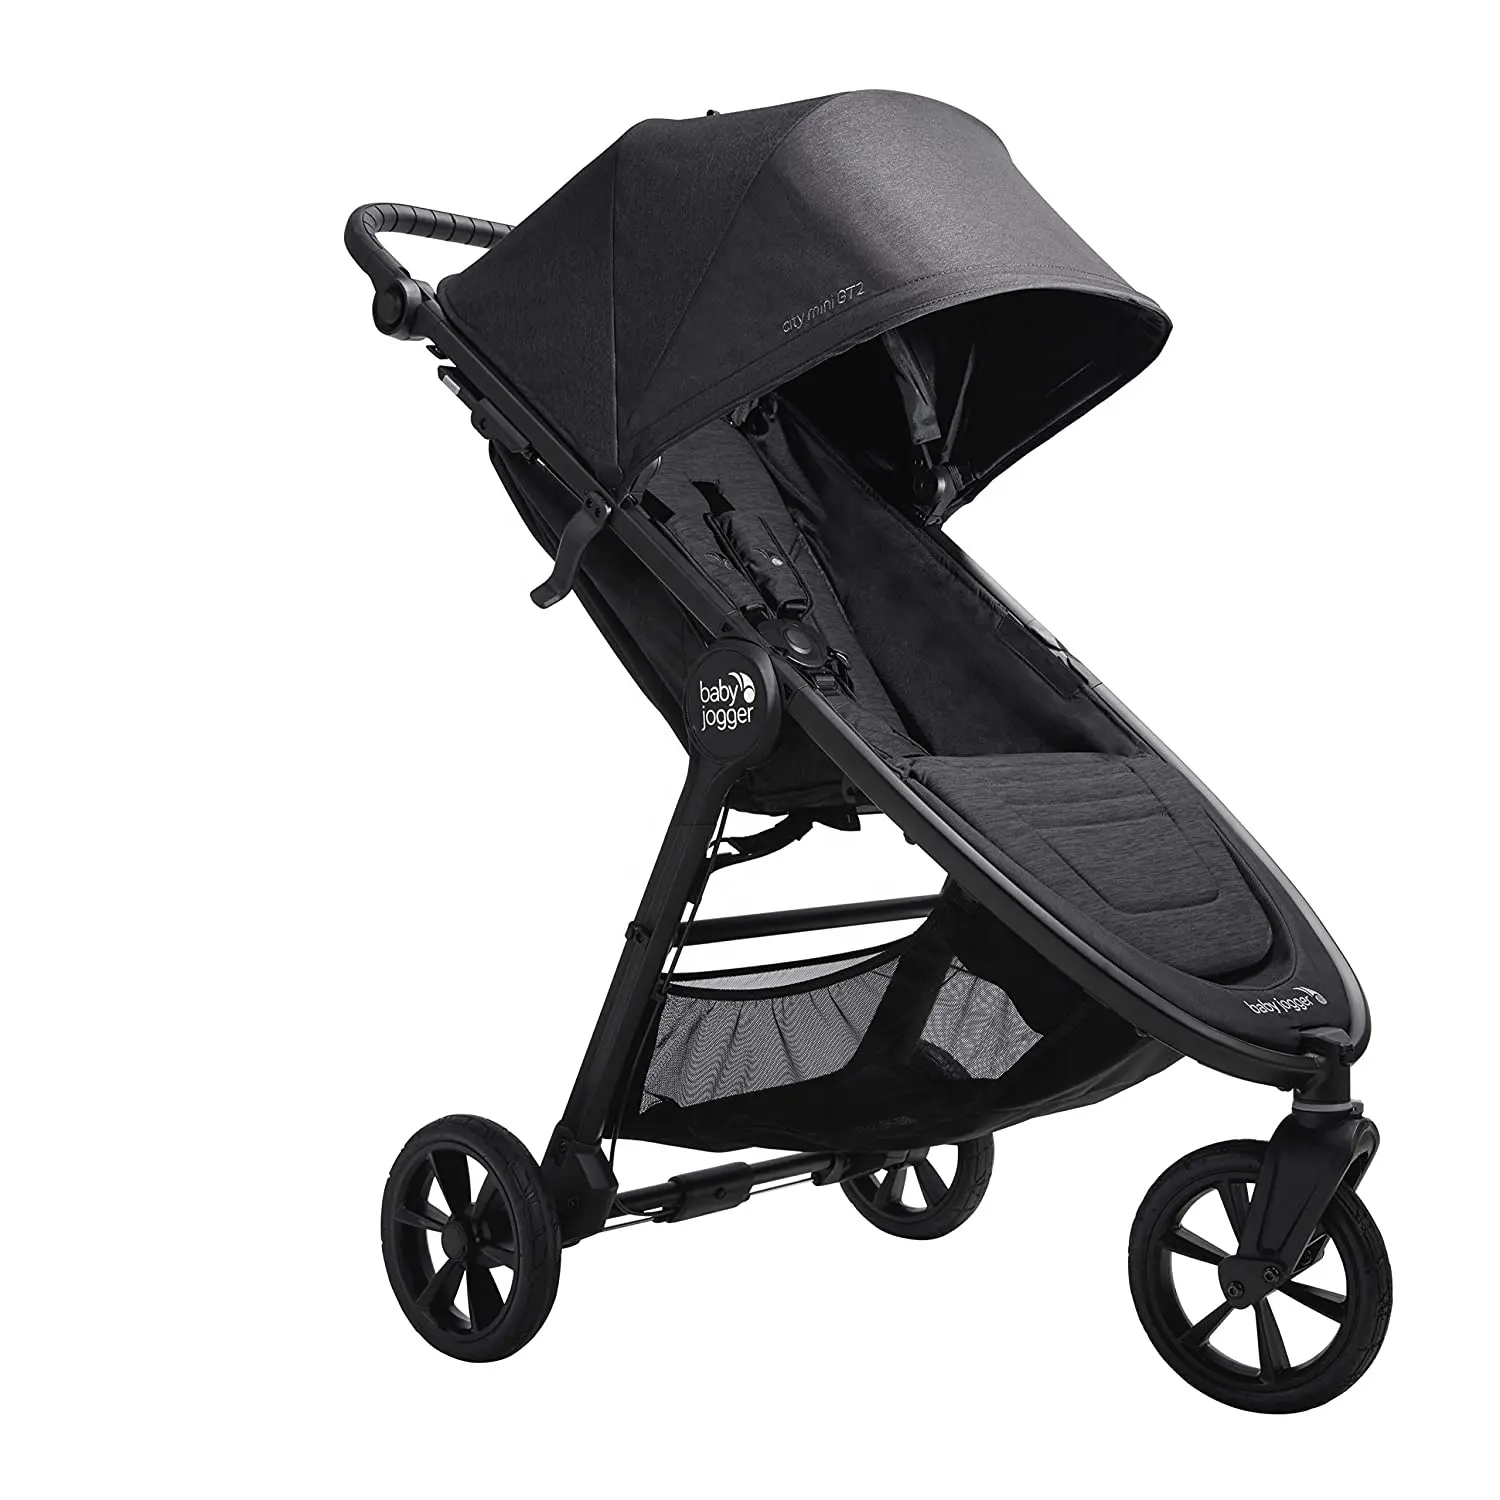 South America popular baby 3 in 1 stroller cool baby strollers Compact Toddler Travel Stroller for Airplane good gift for baby